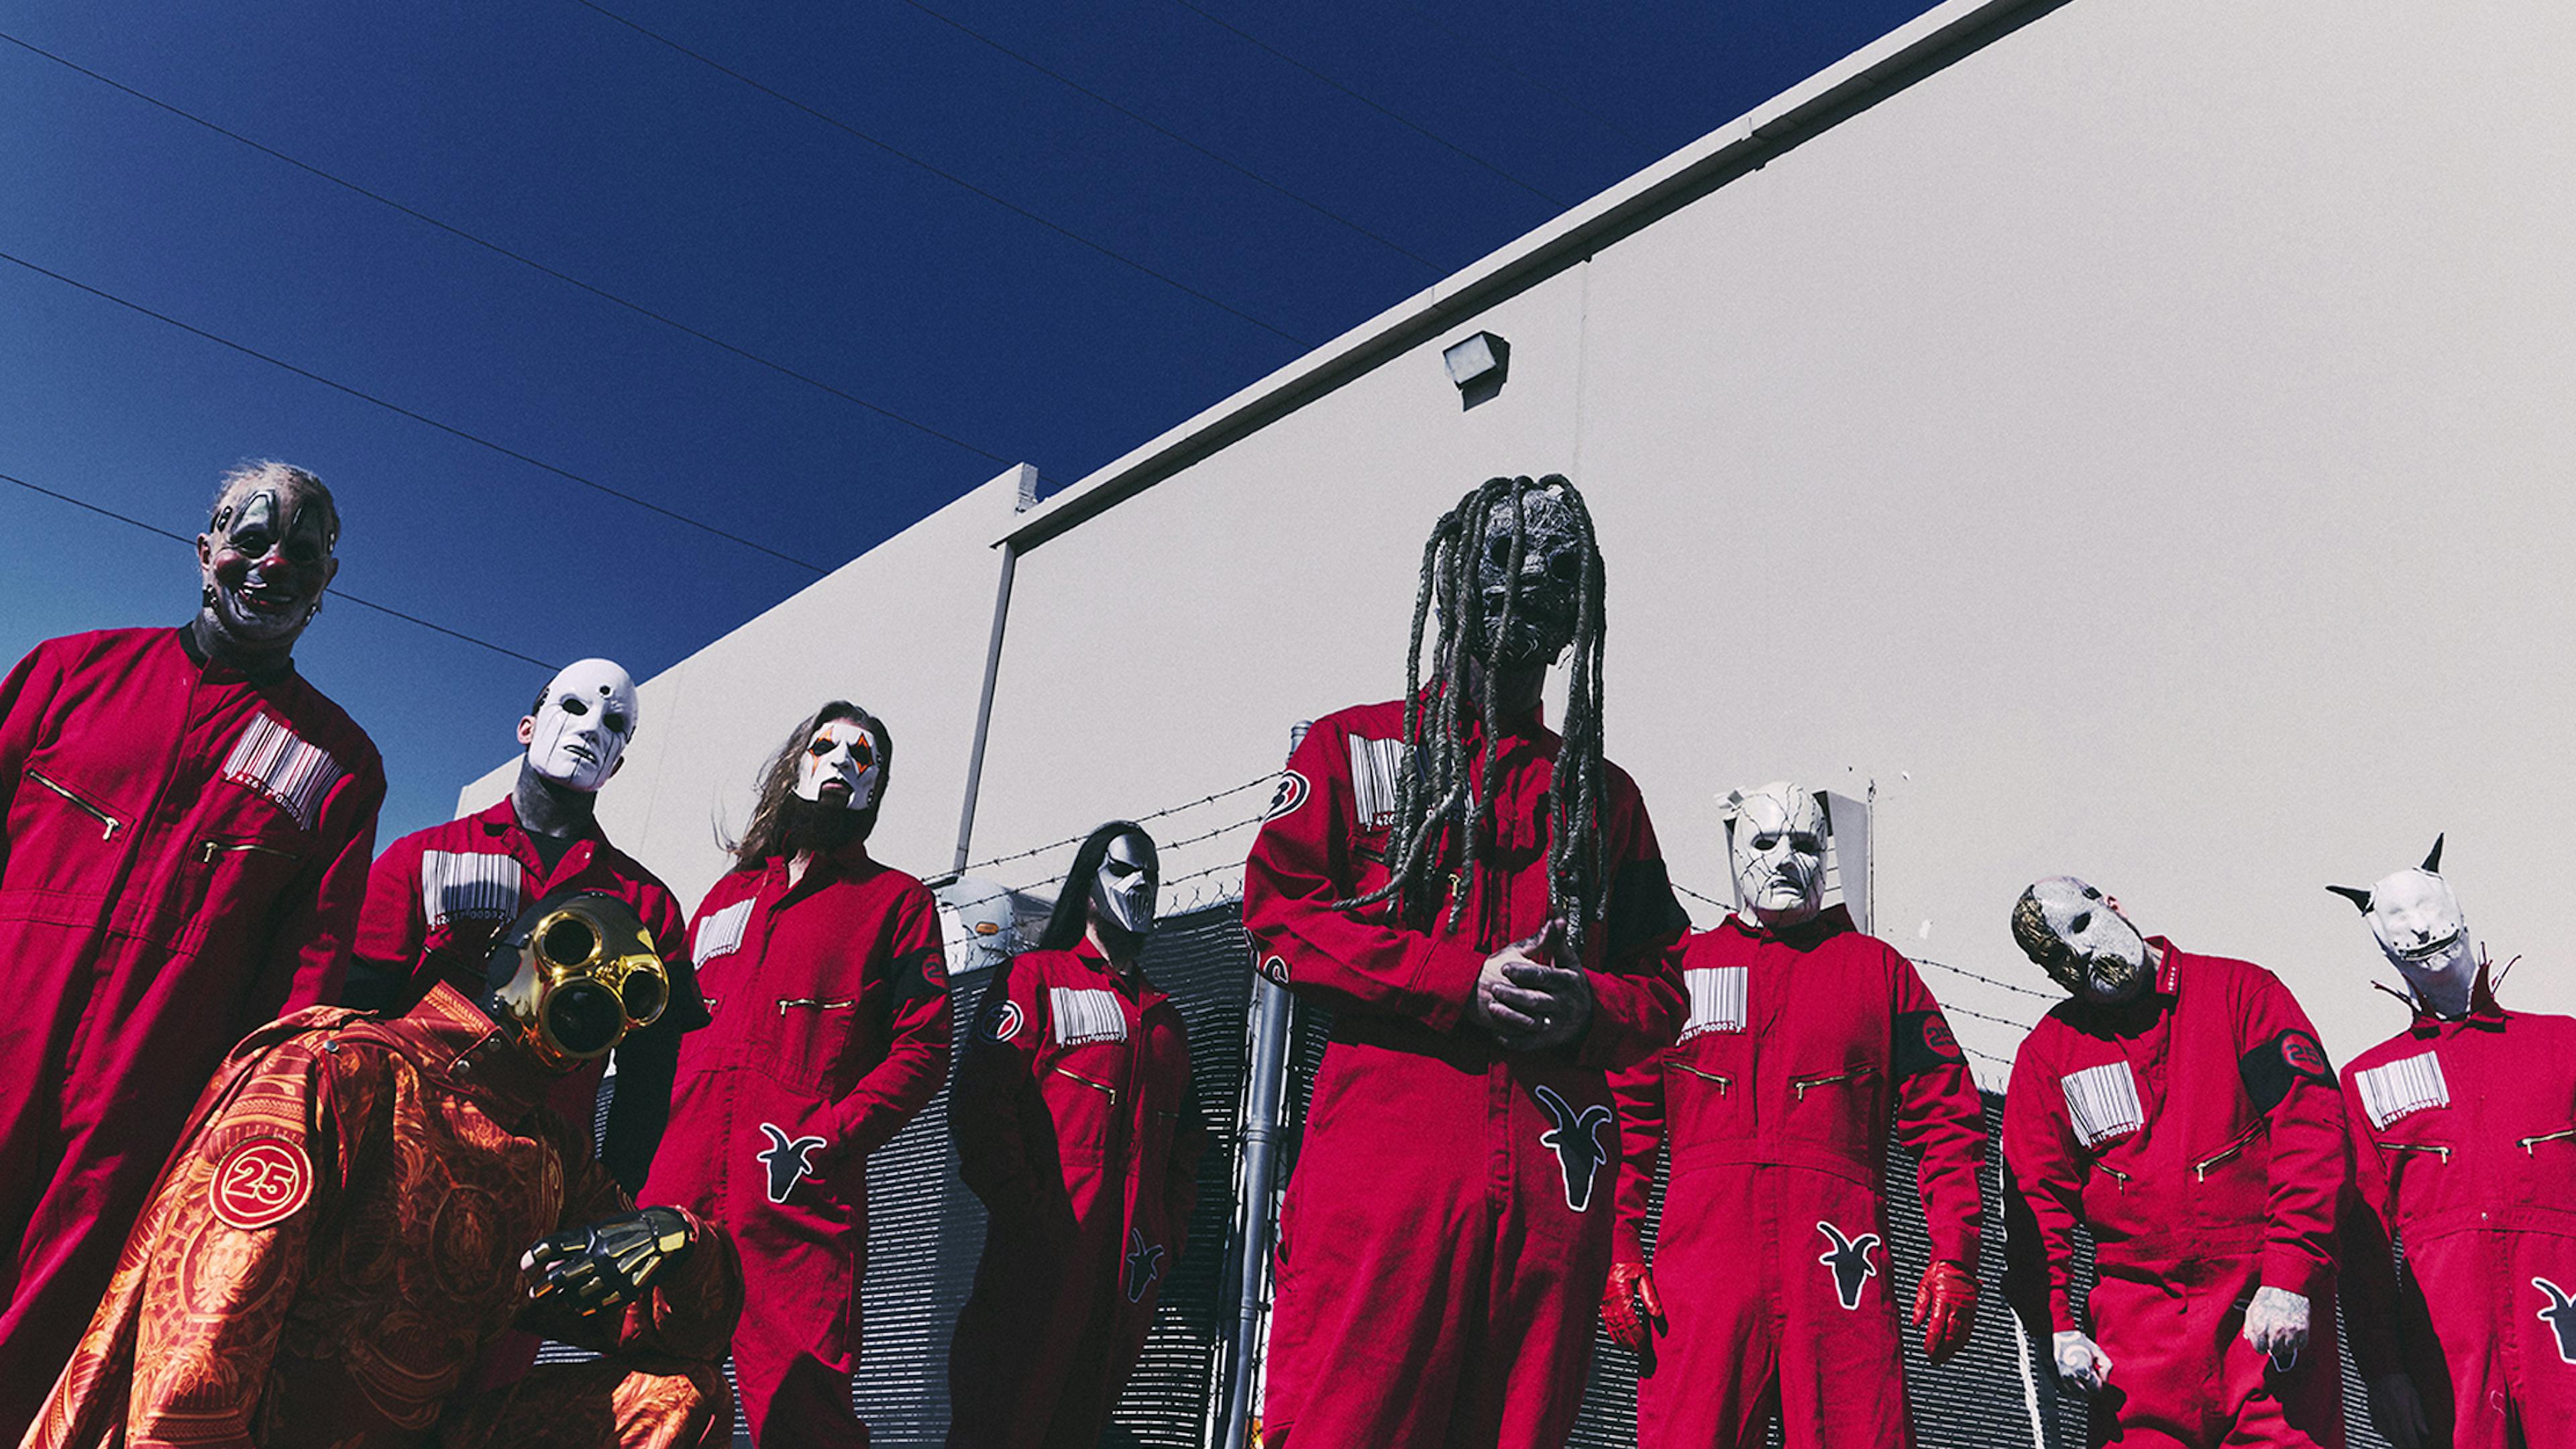 Slipknot confirm they’ve written a new song called Long May You Die